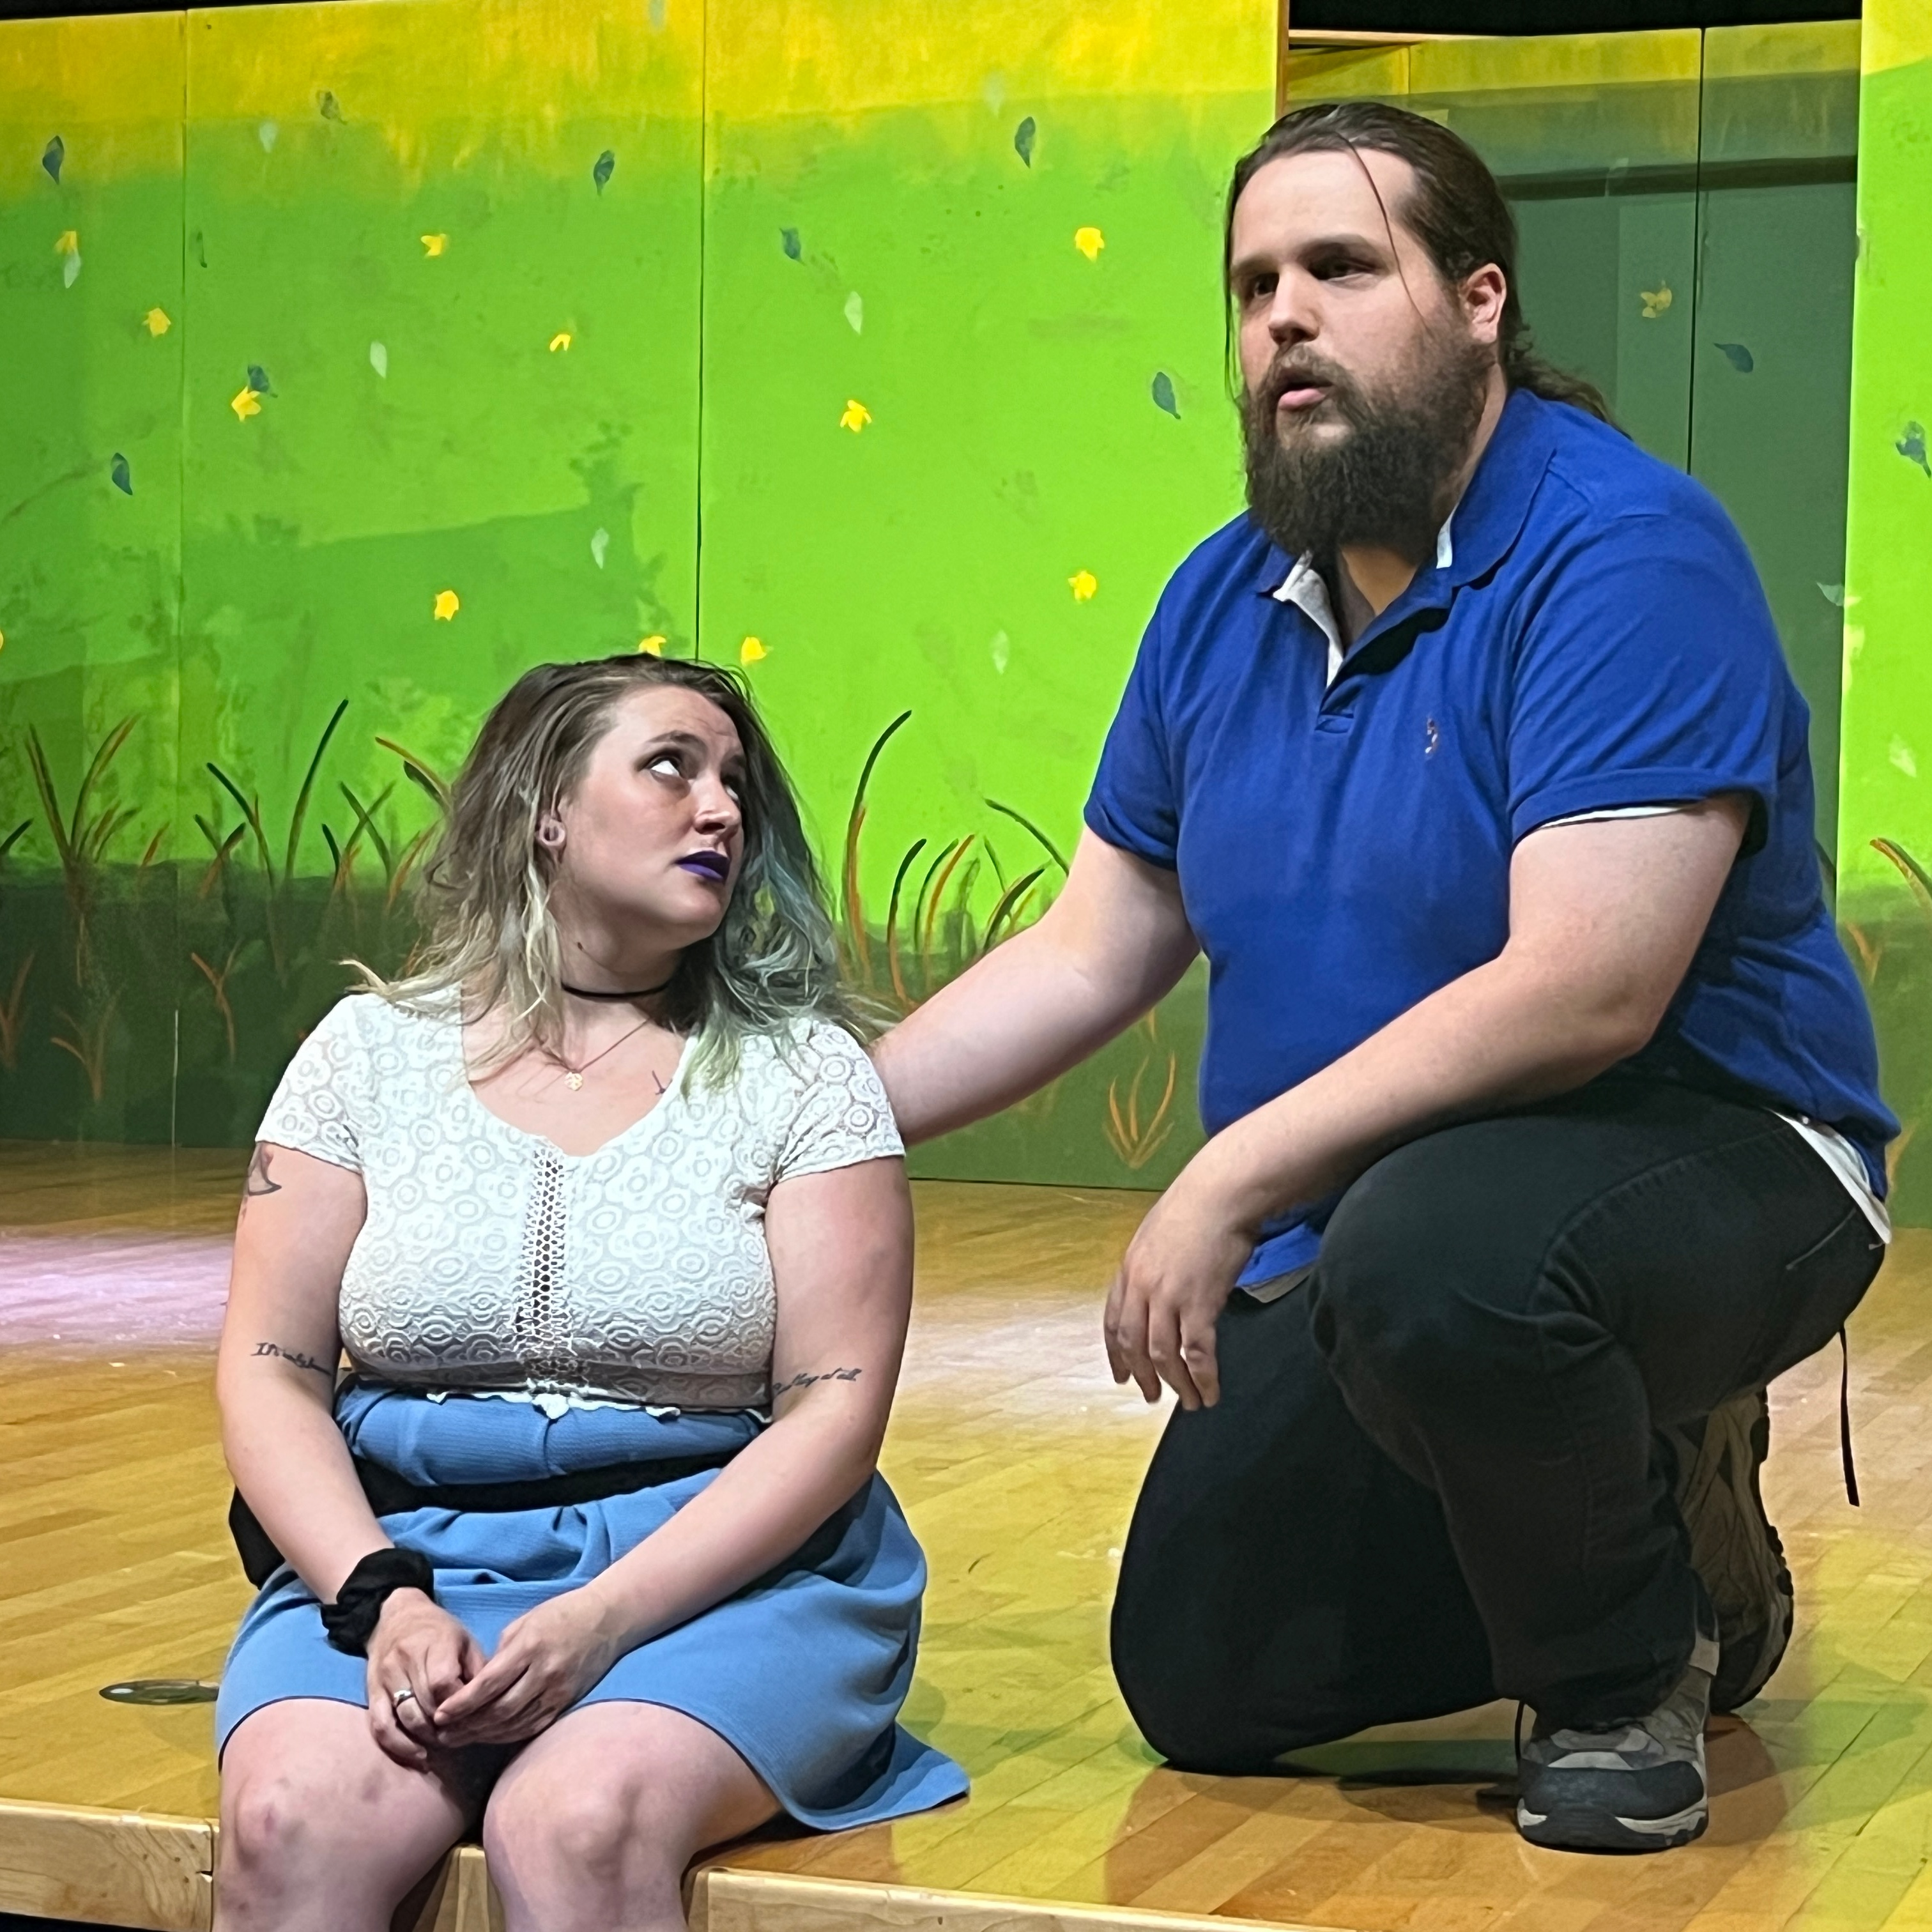 Two actors on a stage, rehearsing a scene from "A Midsummer Night's Dream"